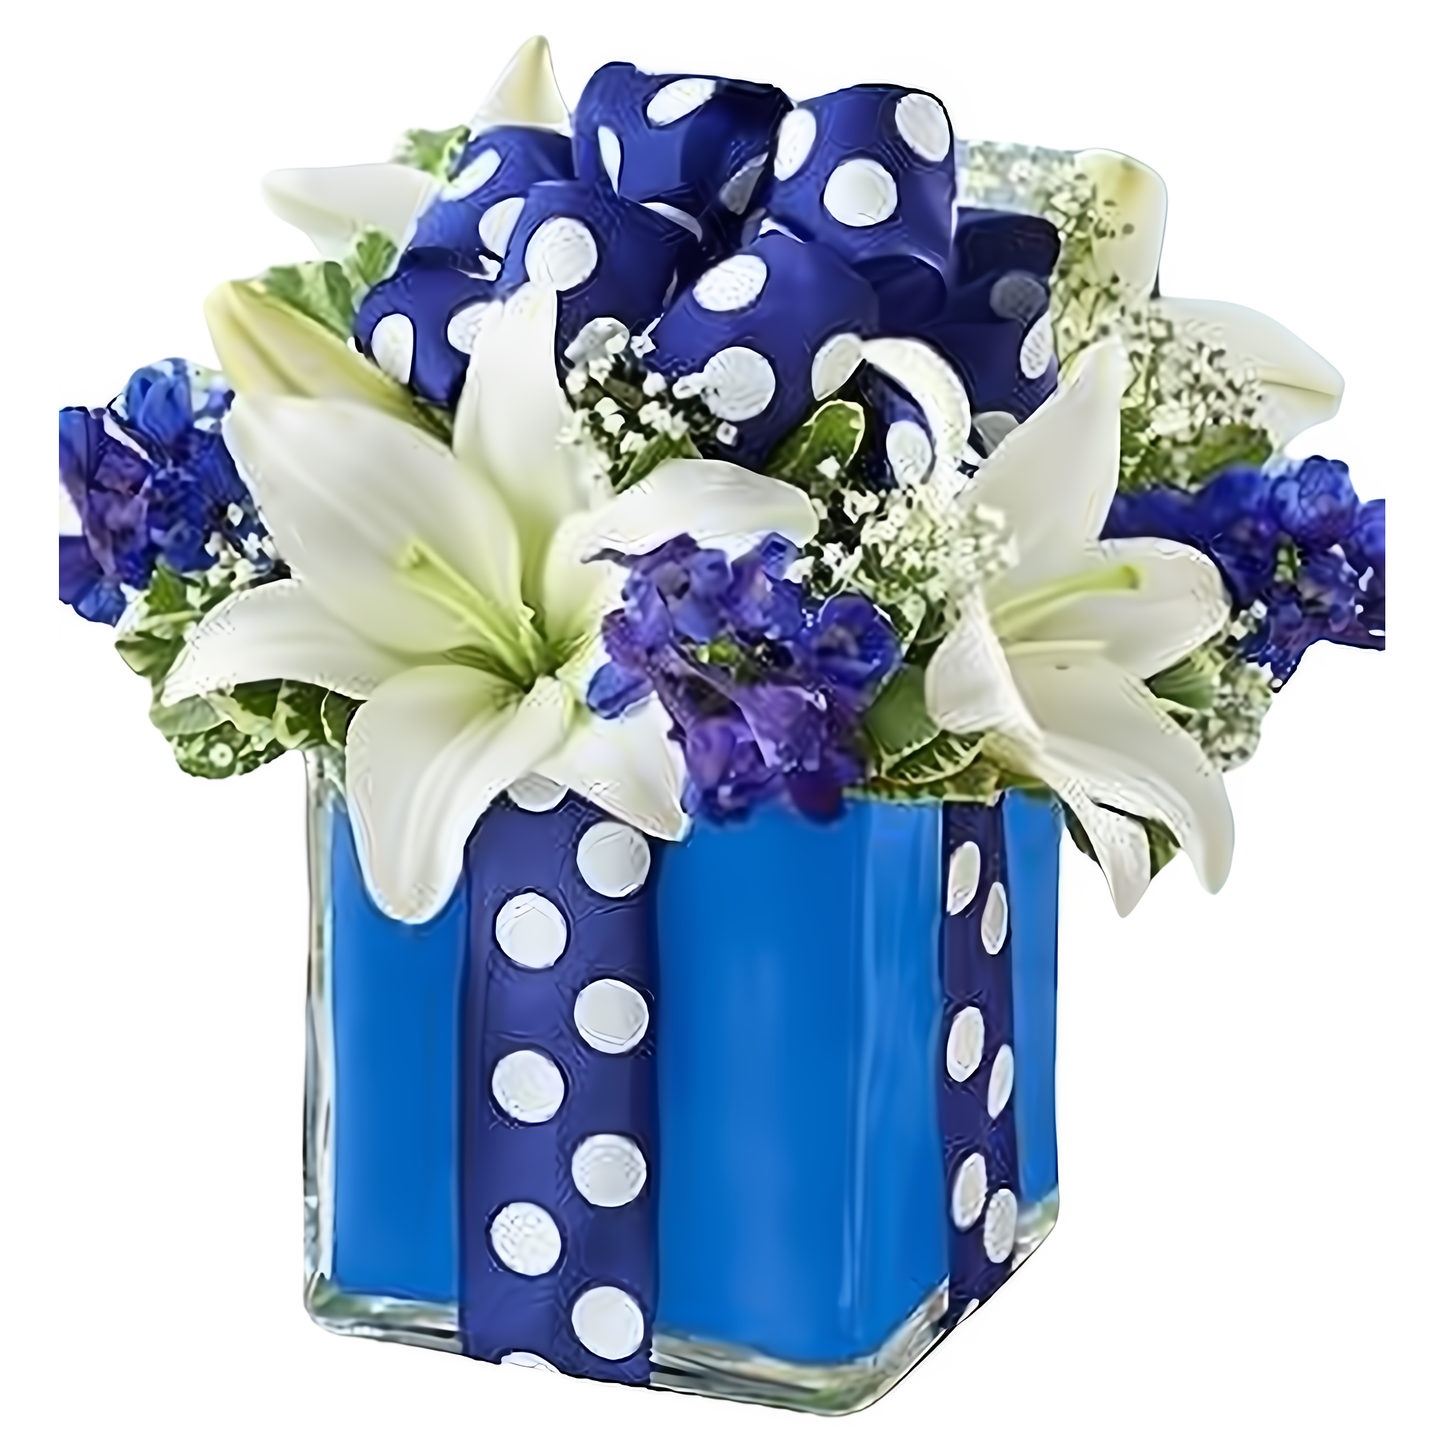 NYC Flower Delivery - All Wrapped Up - Blue - Birthdays